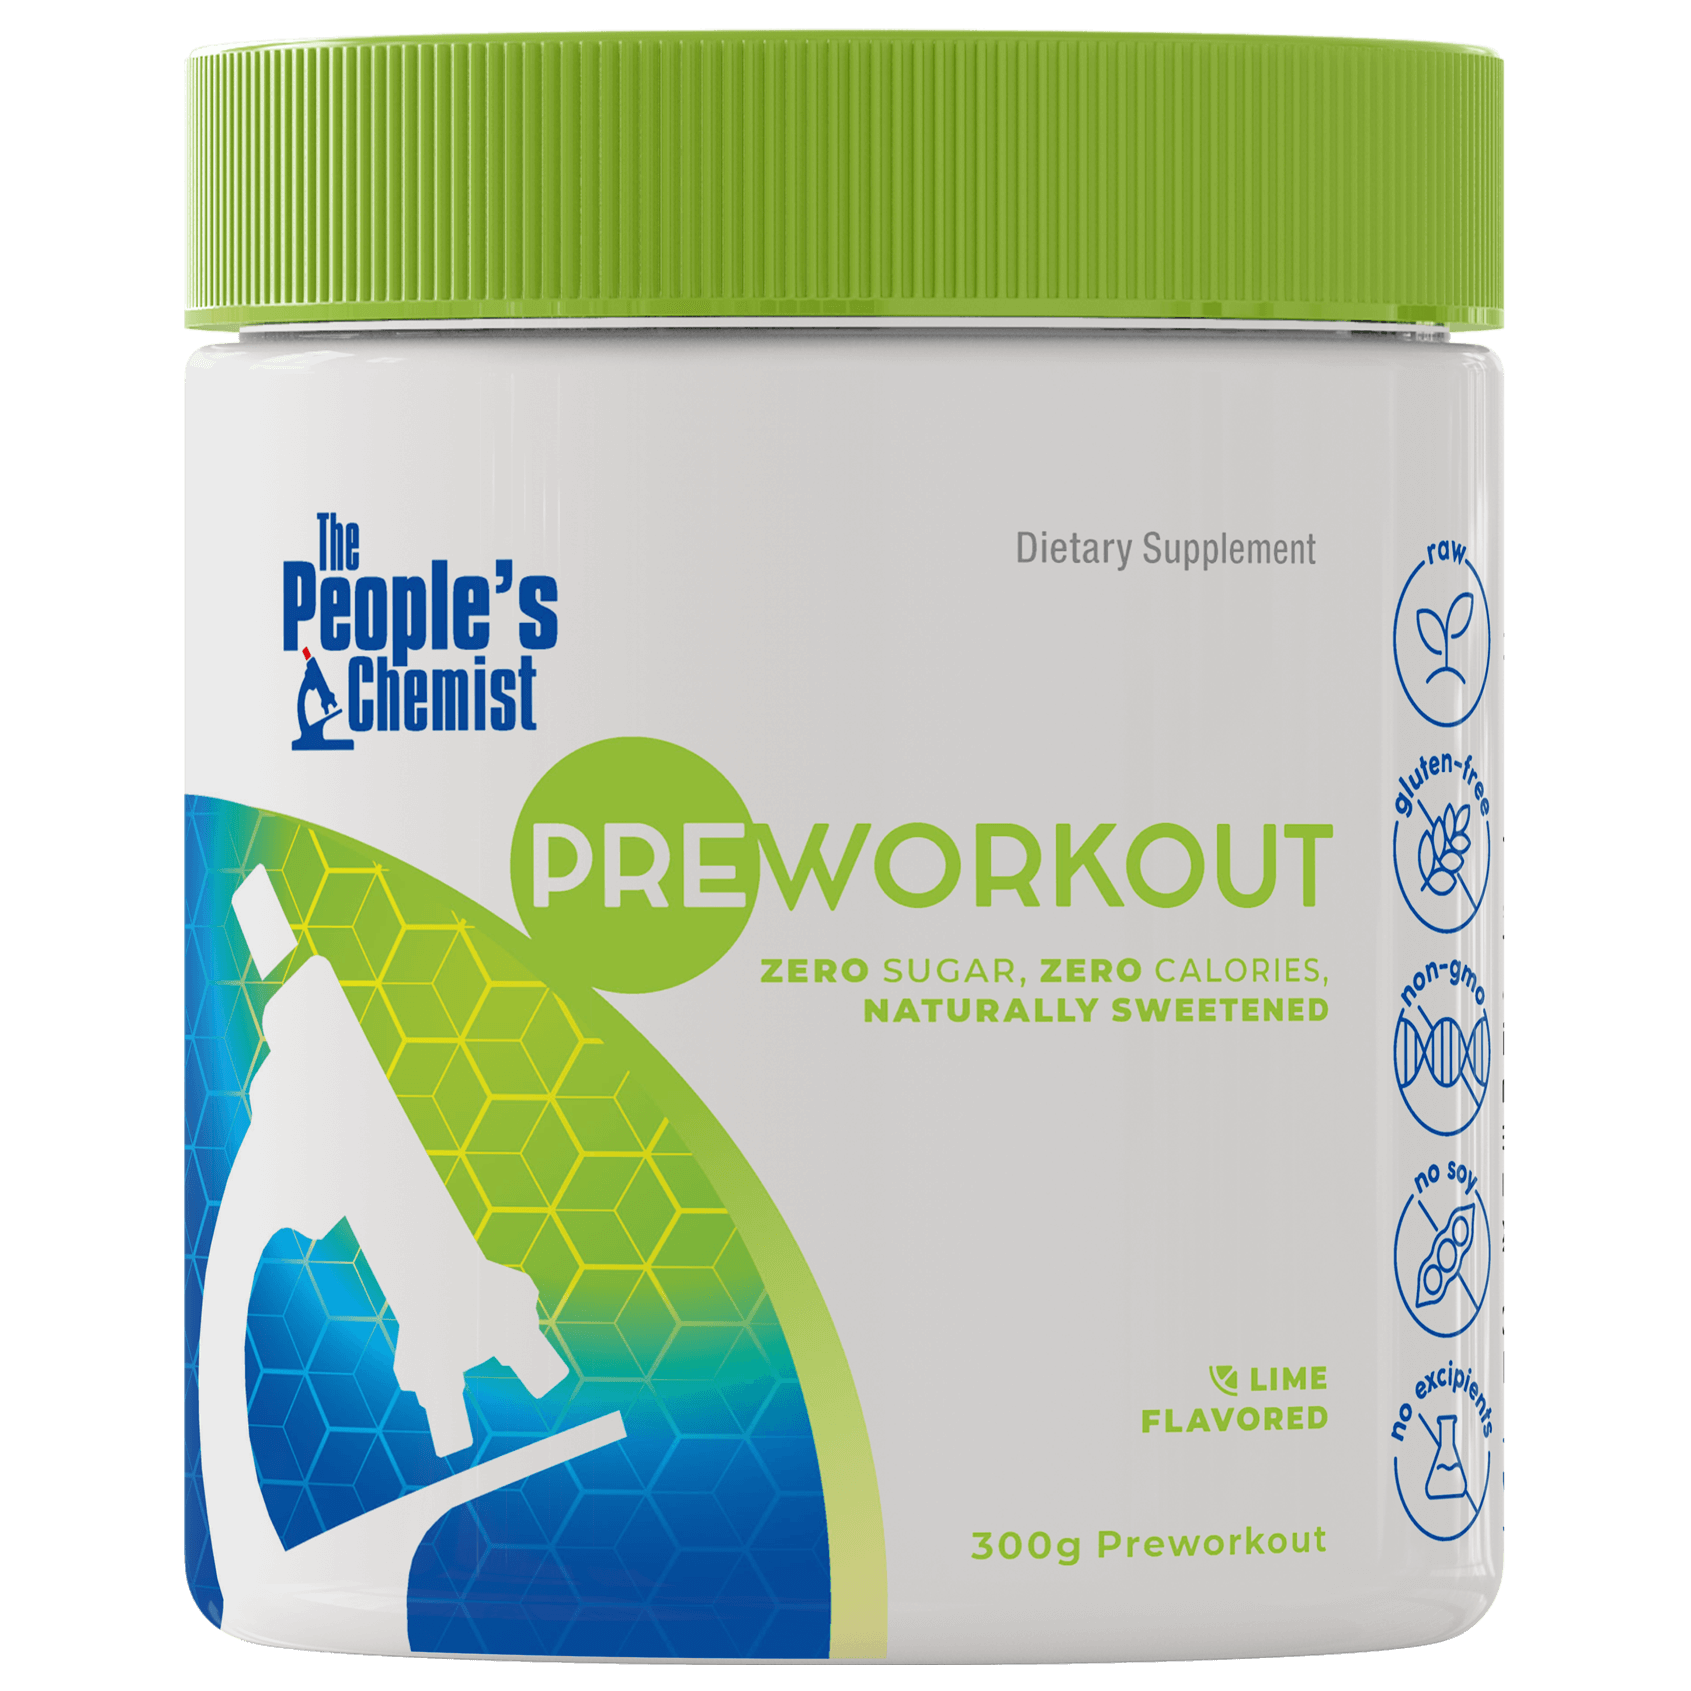 PreWorkout - Pre-Workout - The People's Chemist - The People's Chemist